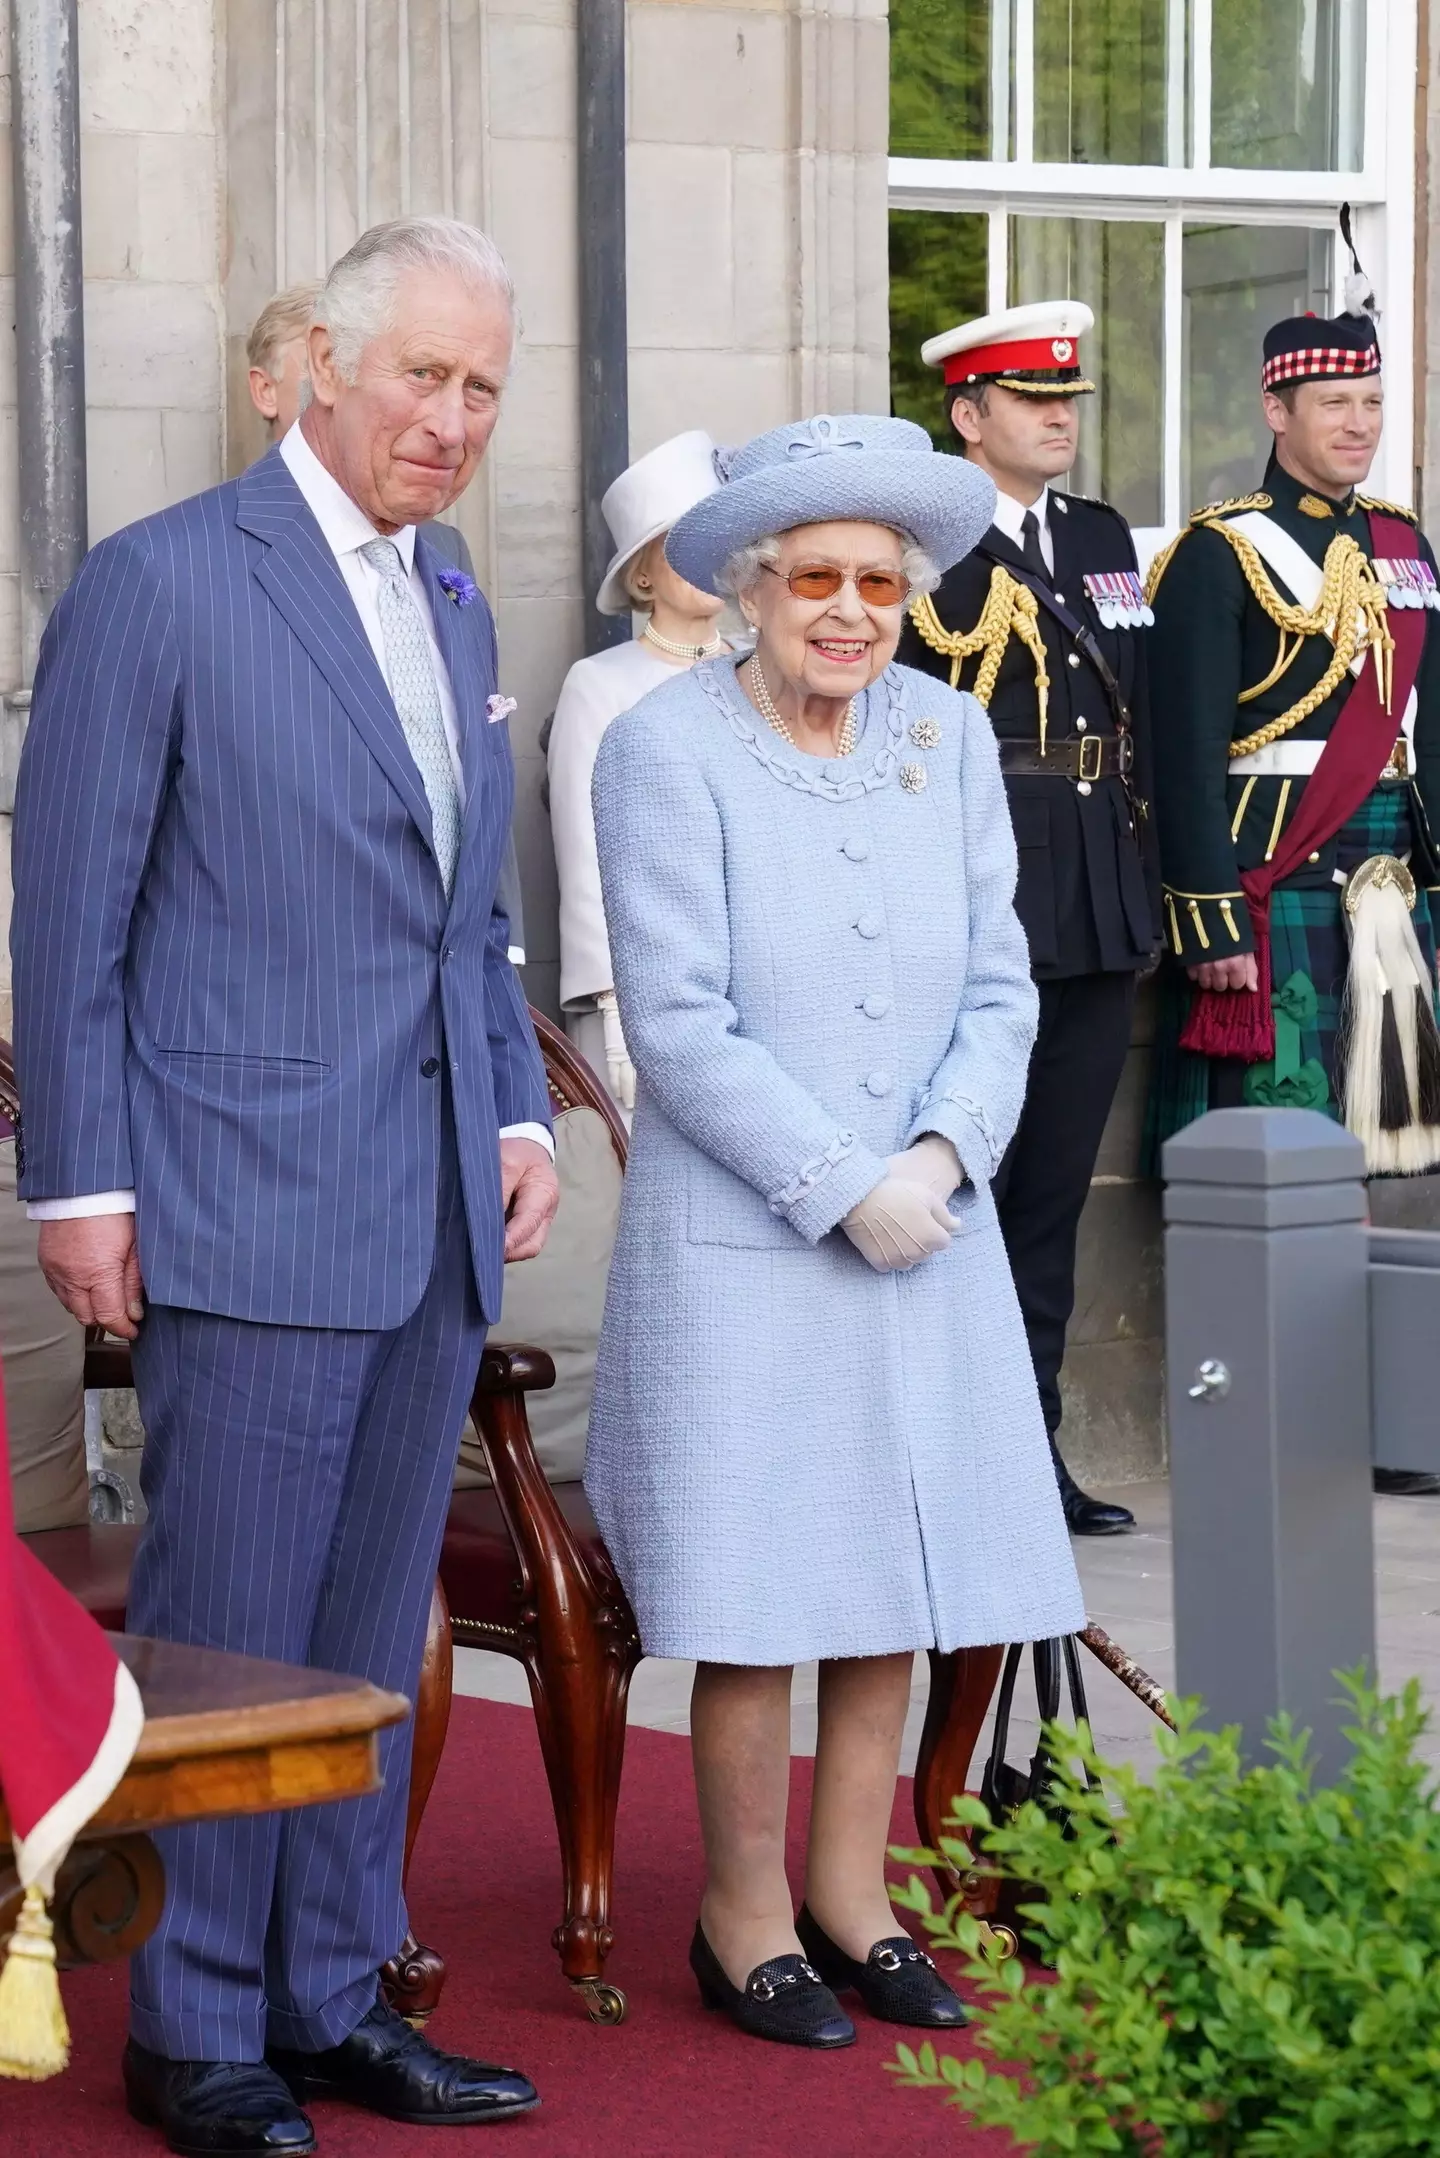 Prince Charles will ascend to the thrown following the death of the Queen.